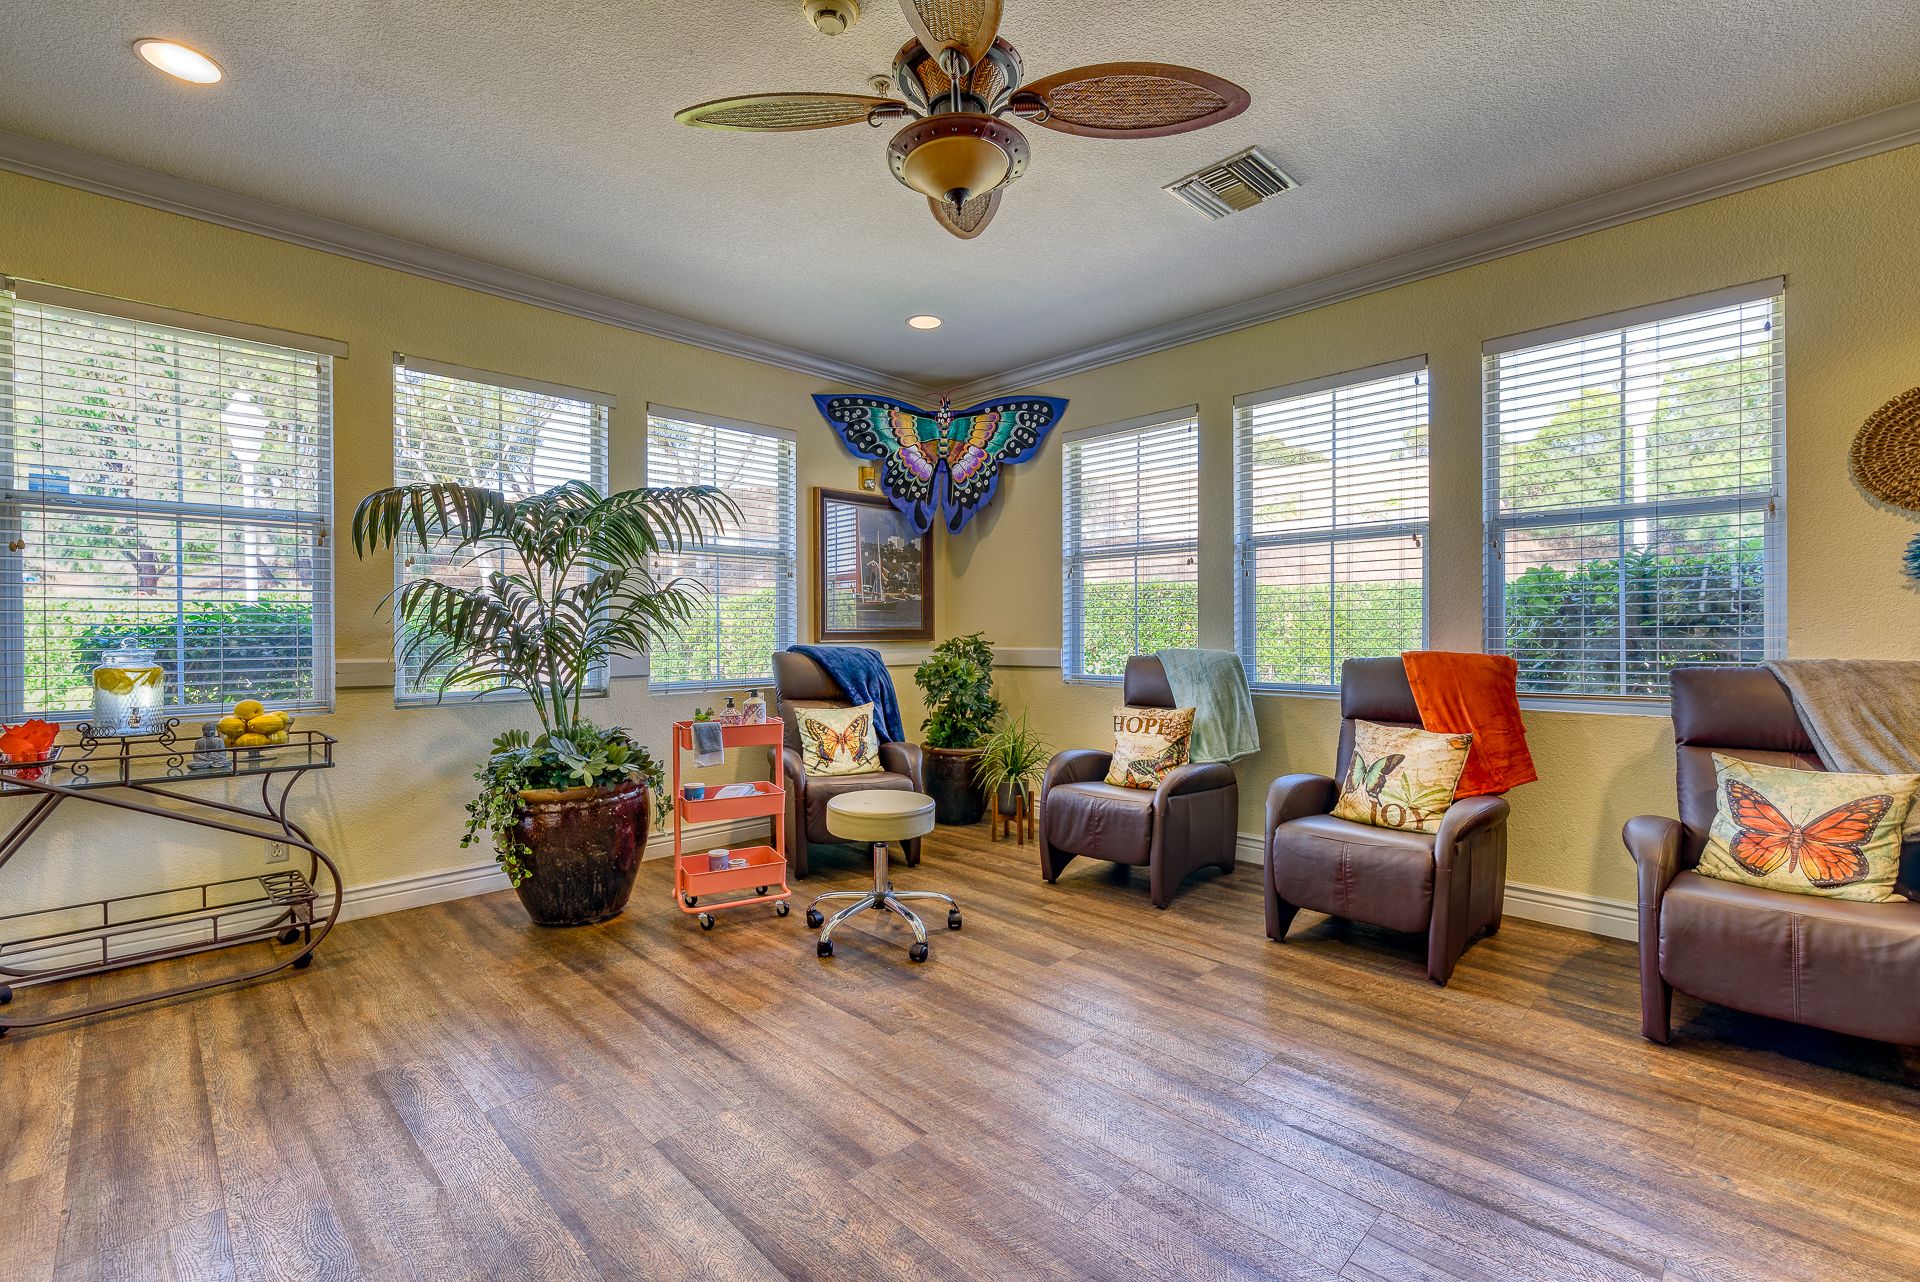 Interior view of Pacifica Senior Living Newport Mesa featuring hardwood floors, furniture, and home decor.